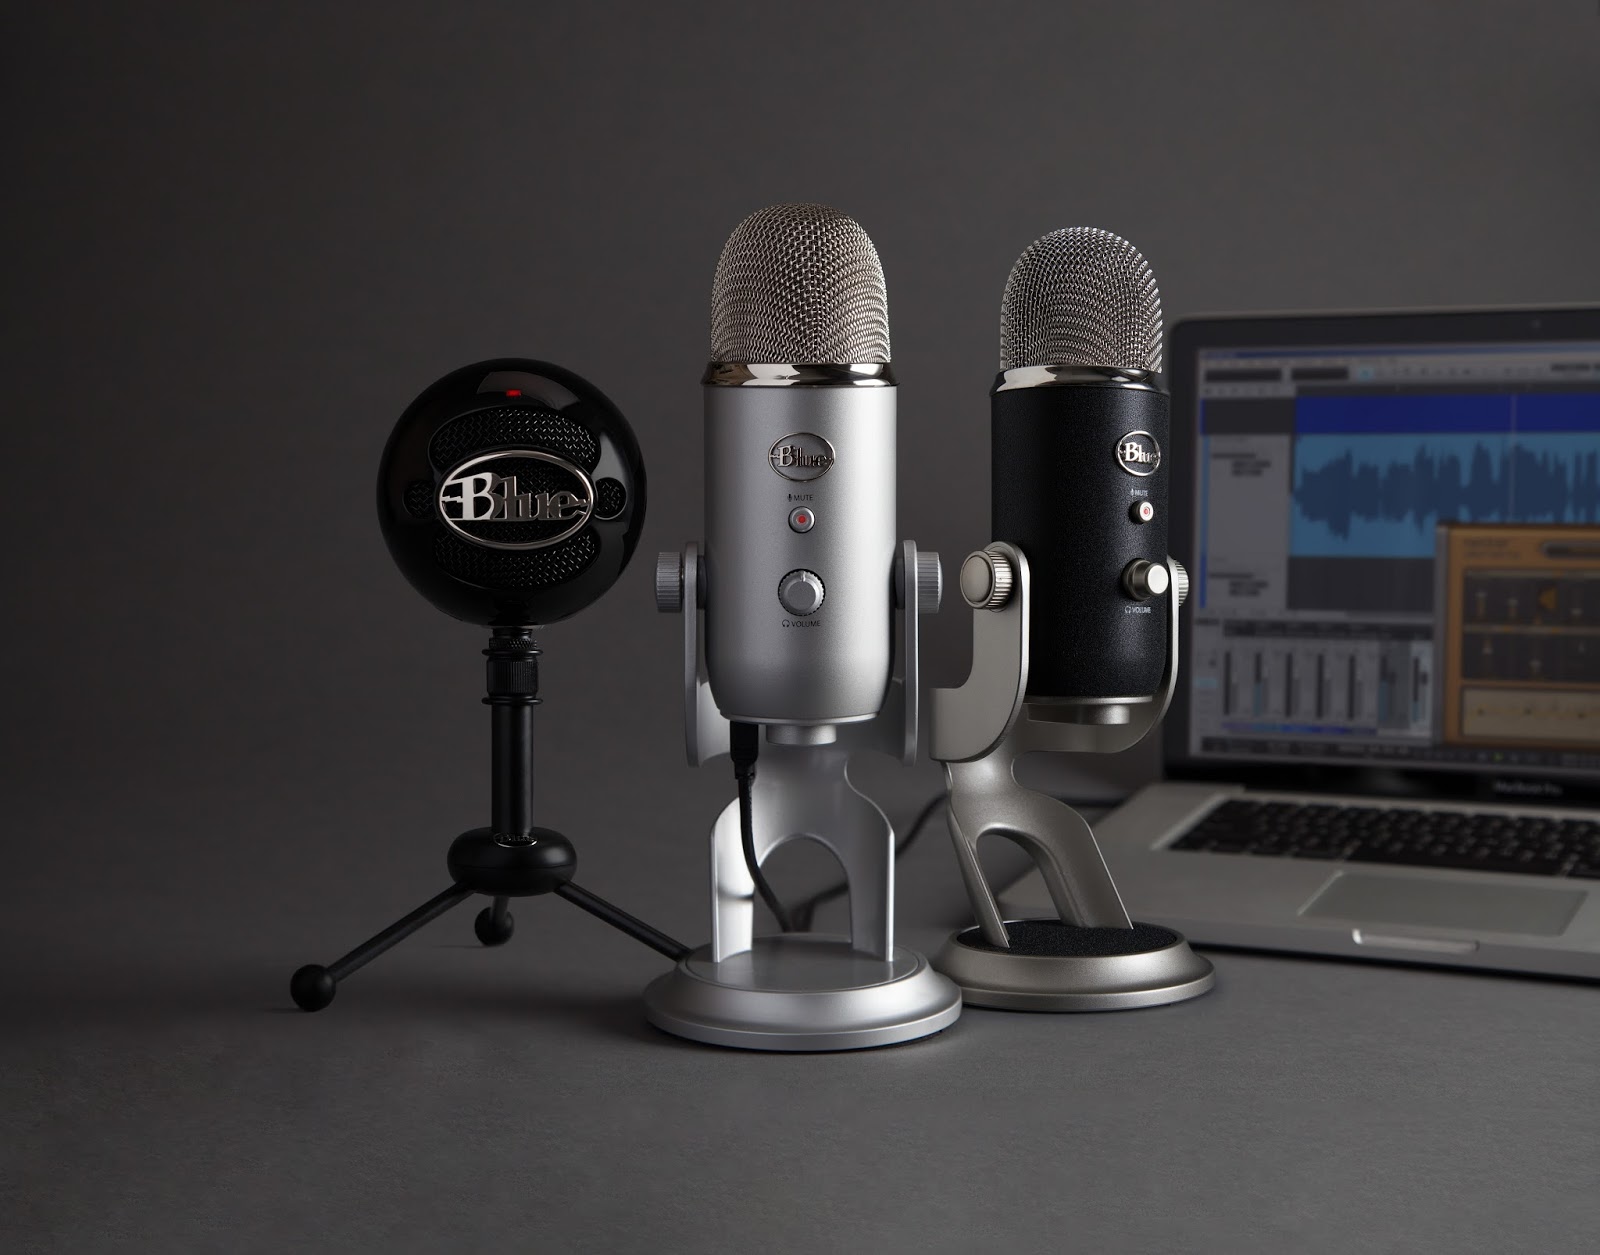 Blue Microphones Announces Usb Studio Series All In One Systems Featuring Snowball Yeti And Yeti Pro Mics Creative Edge Music